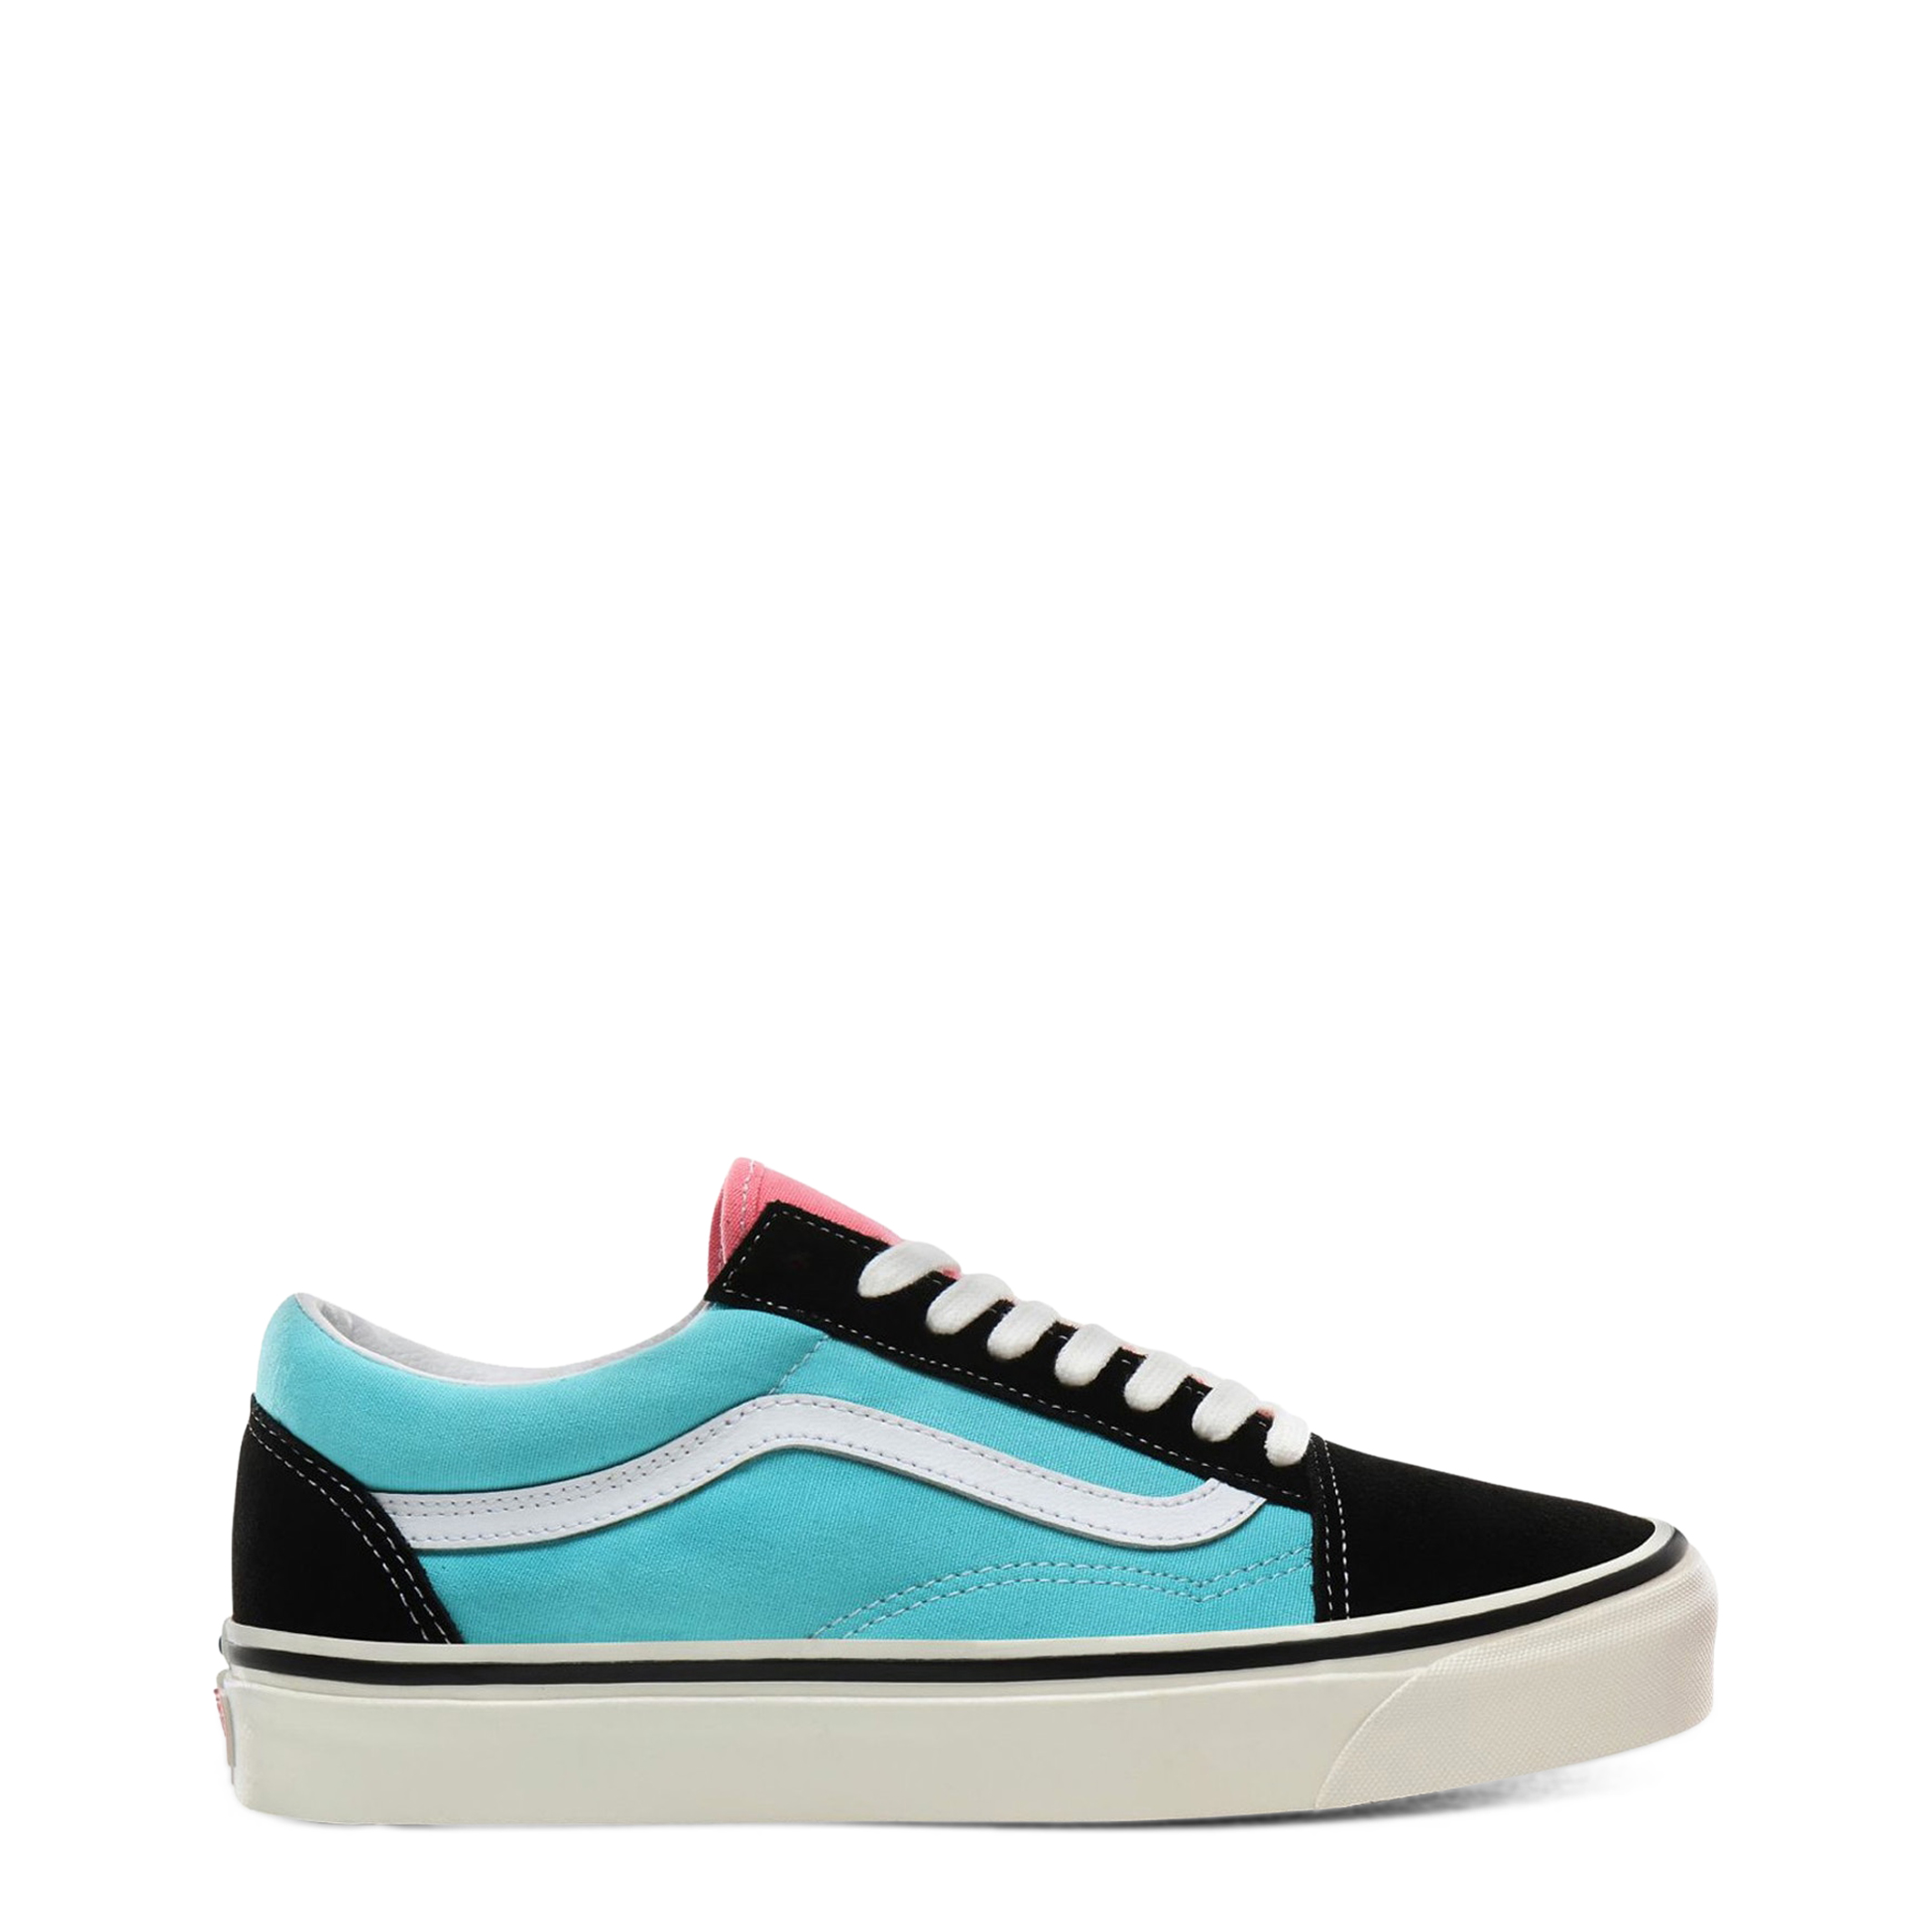 Vans - Wholesale and Dropship Branded 